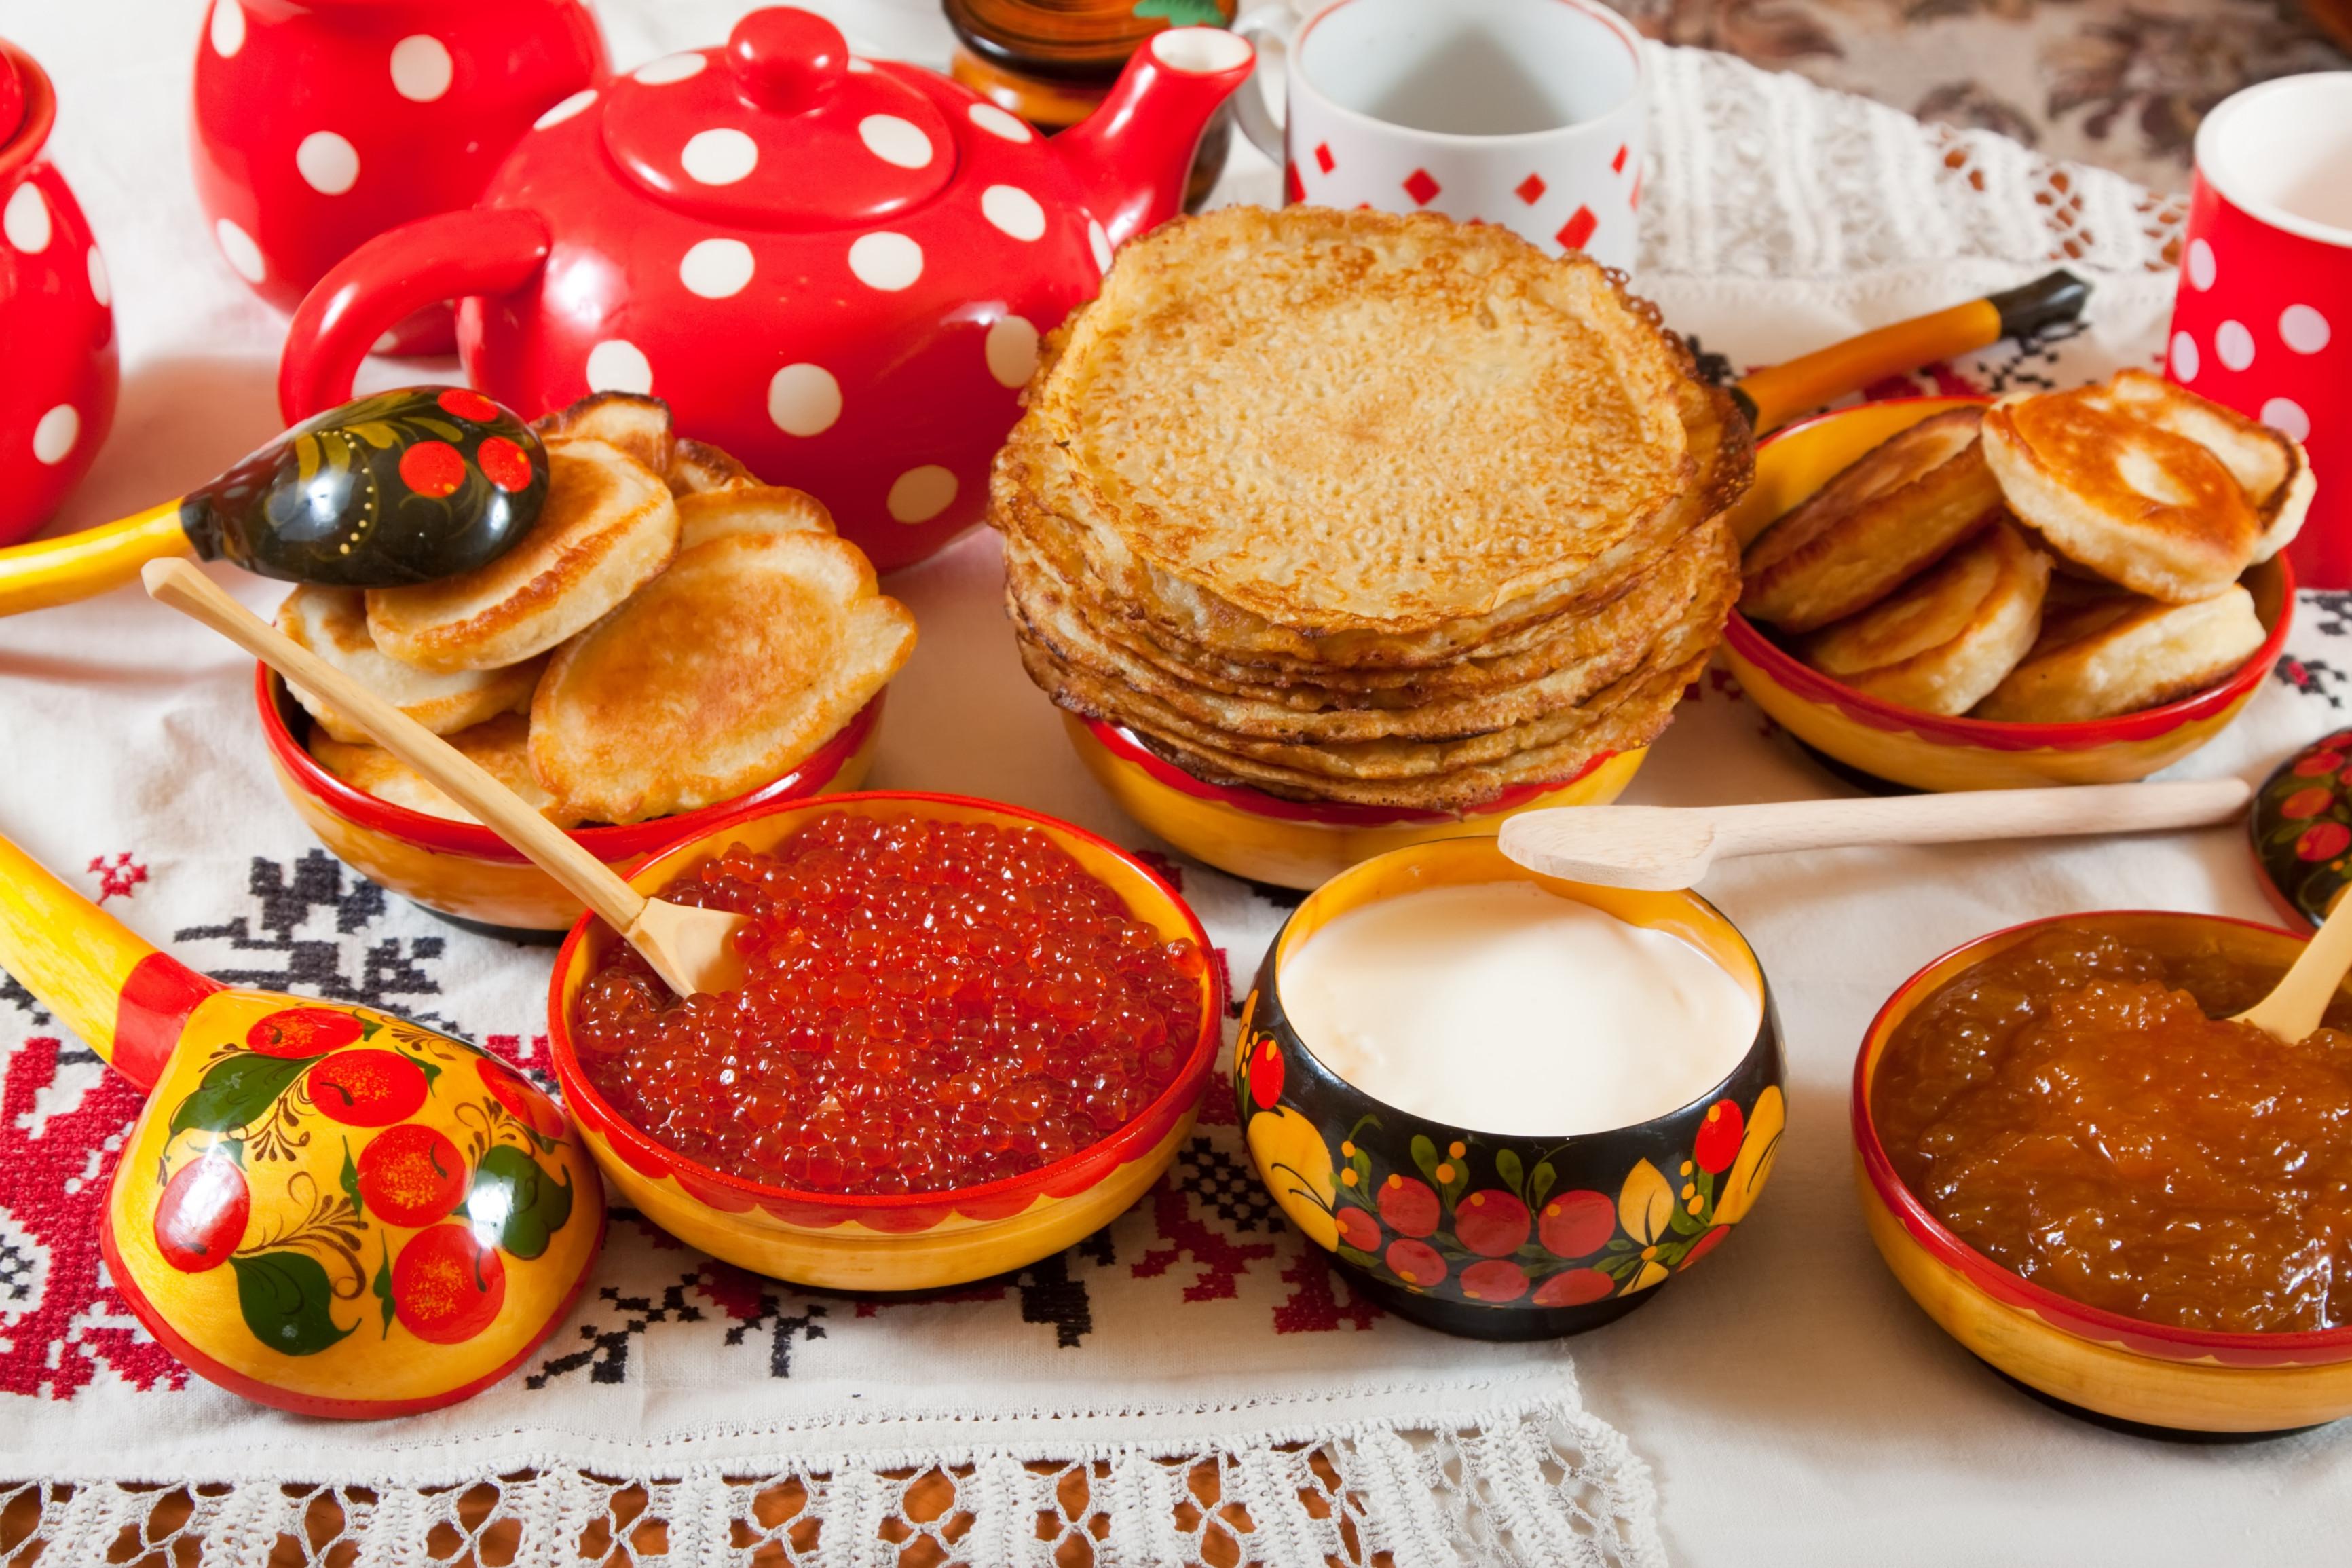 https://ru.freepik.com/free-photo/pancake-with-red-caviar_1631751.htm#fromView=search&page=1&position=5&uuid=0d2e2b37-cc44-4dbd-9105-02fa4ef11bed